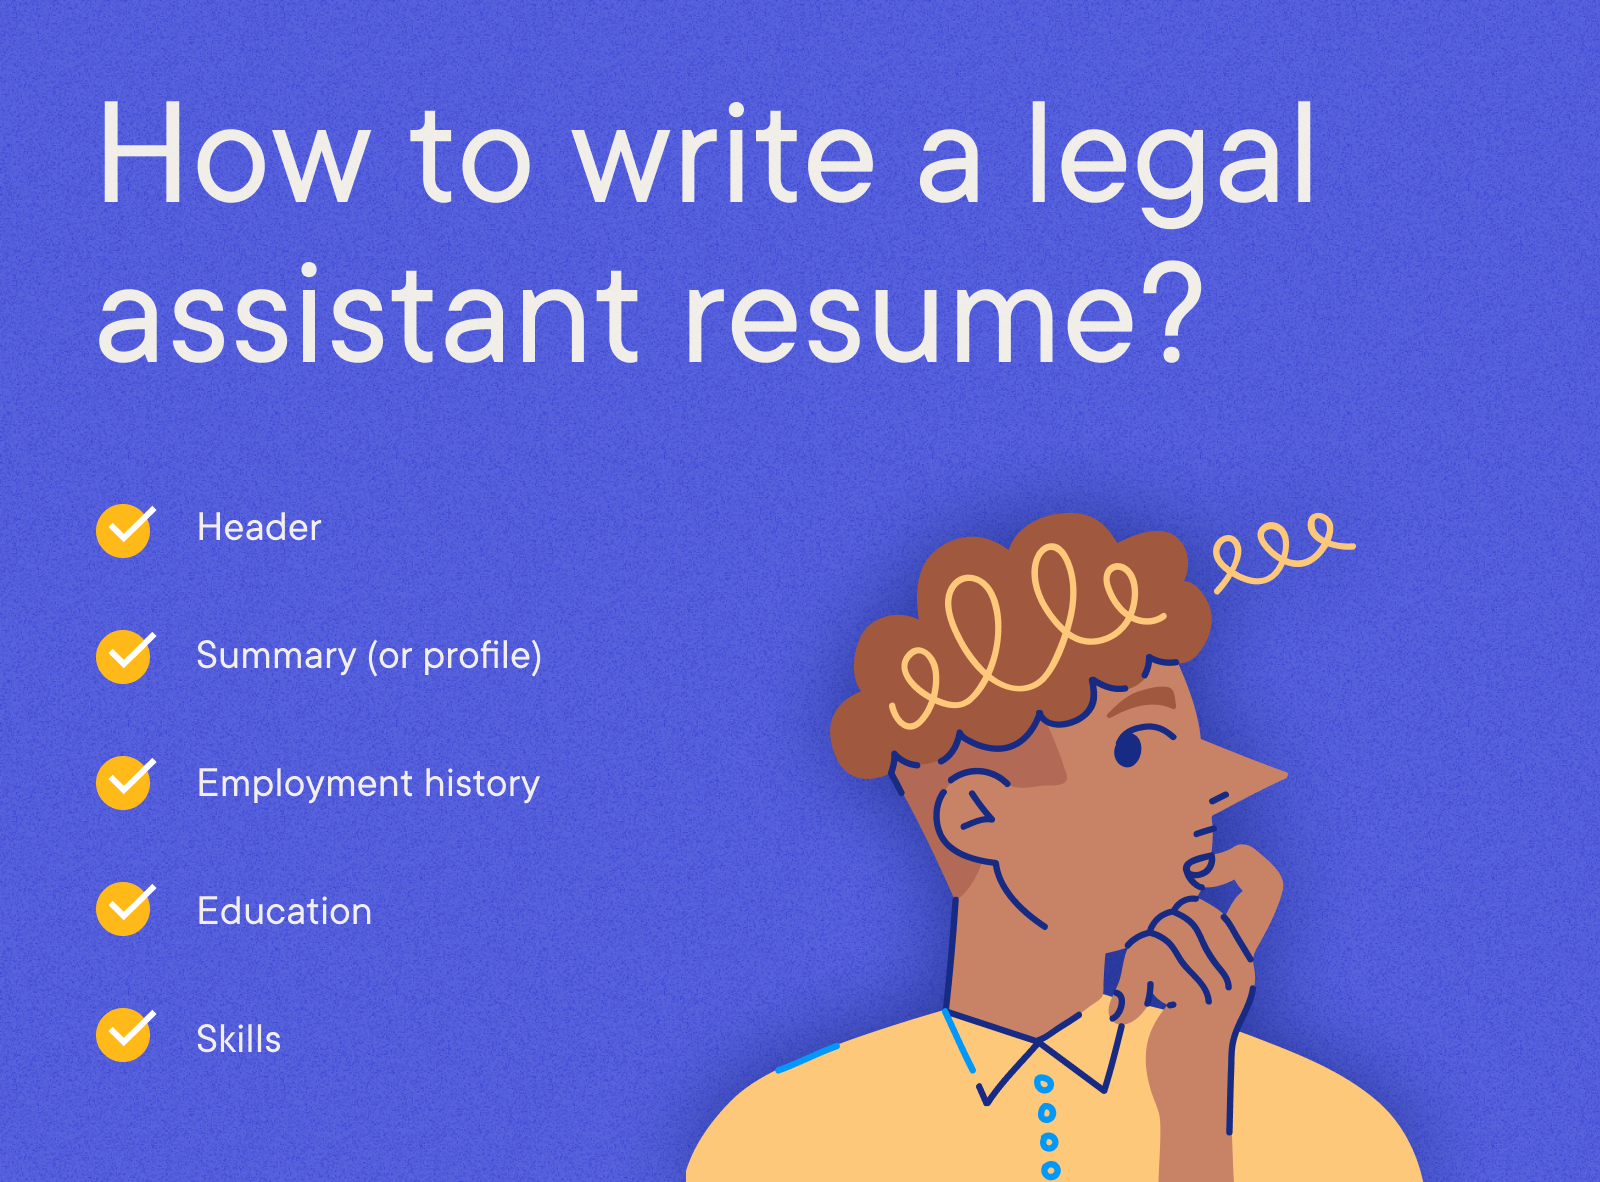 Legal Assistant - How to write a legal assistant resume?